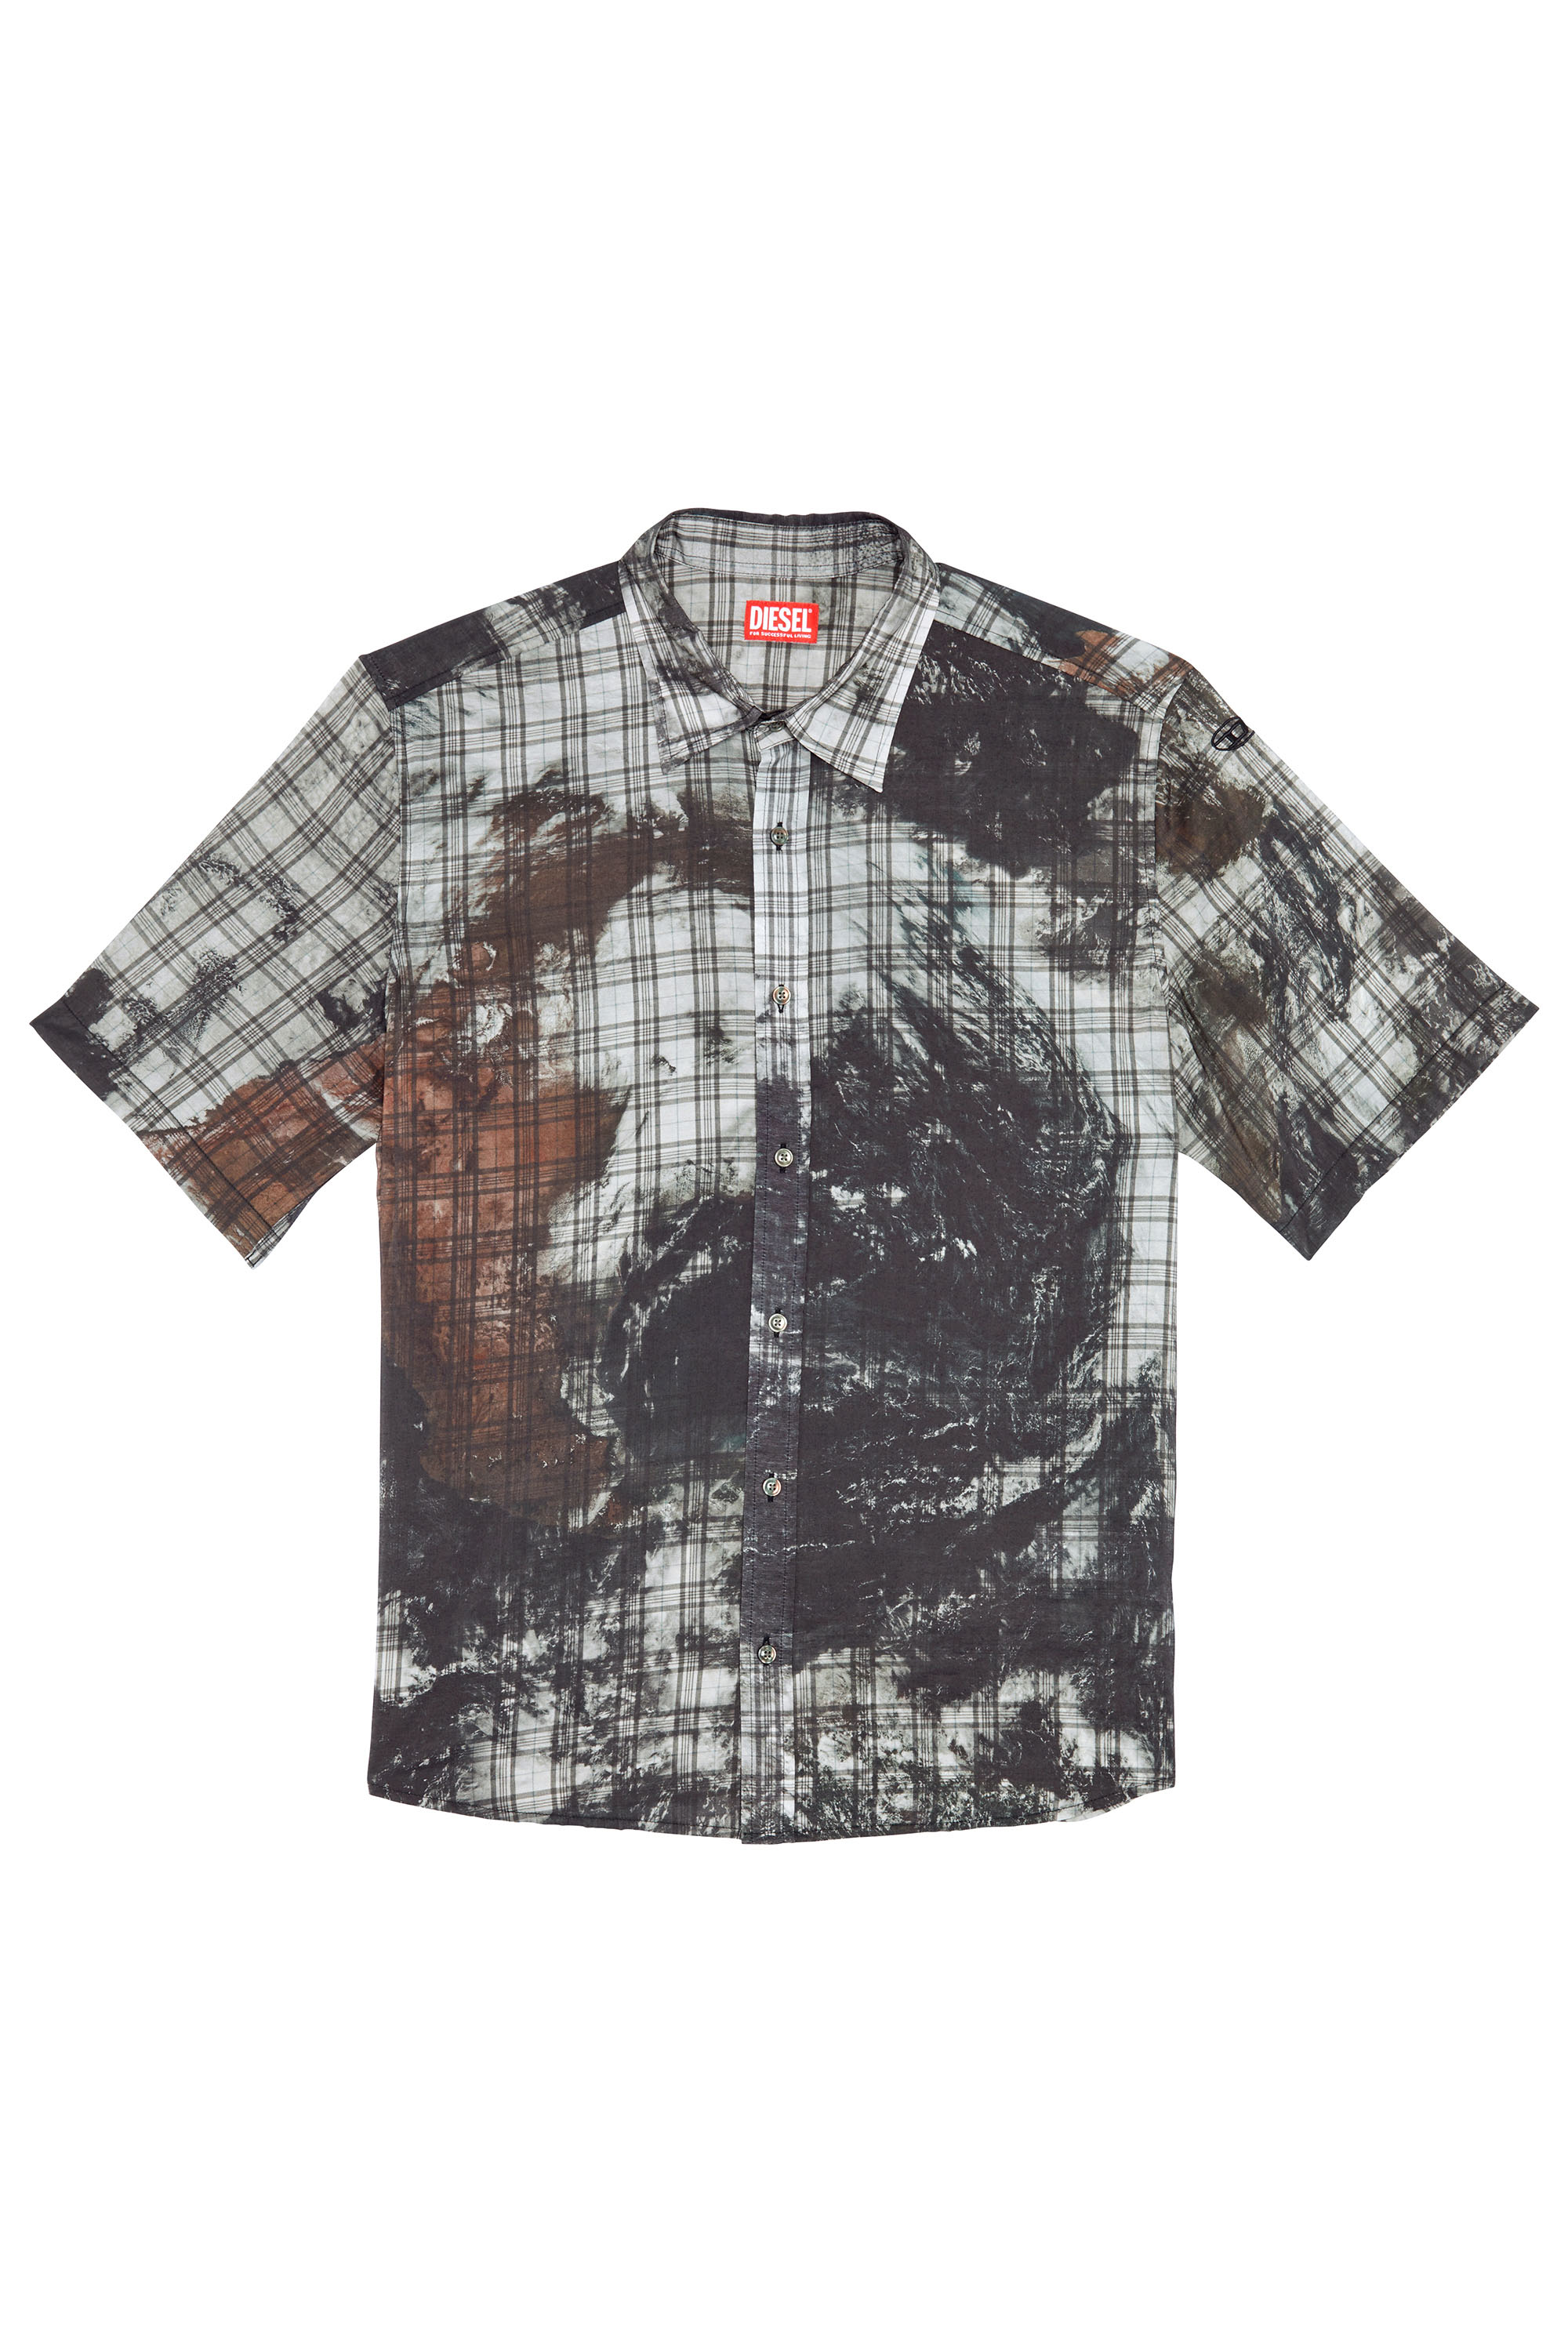 Diesel Checked Shirt With Planet Print In Multicolor